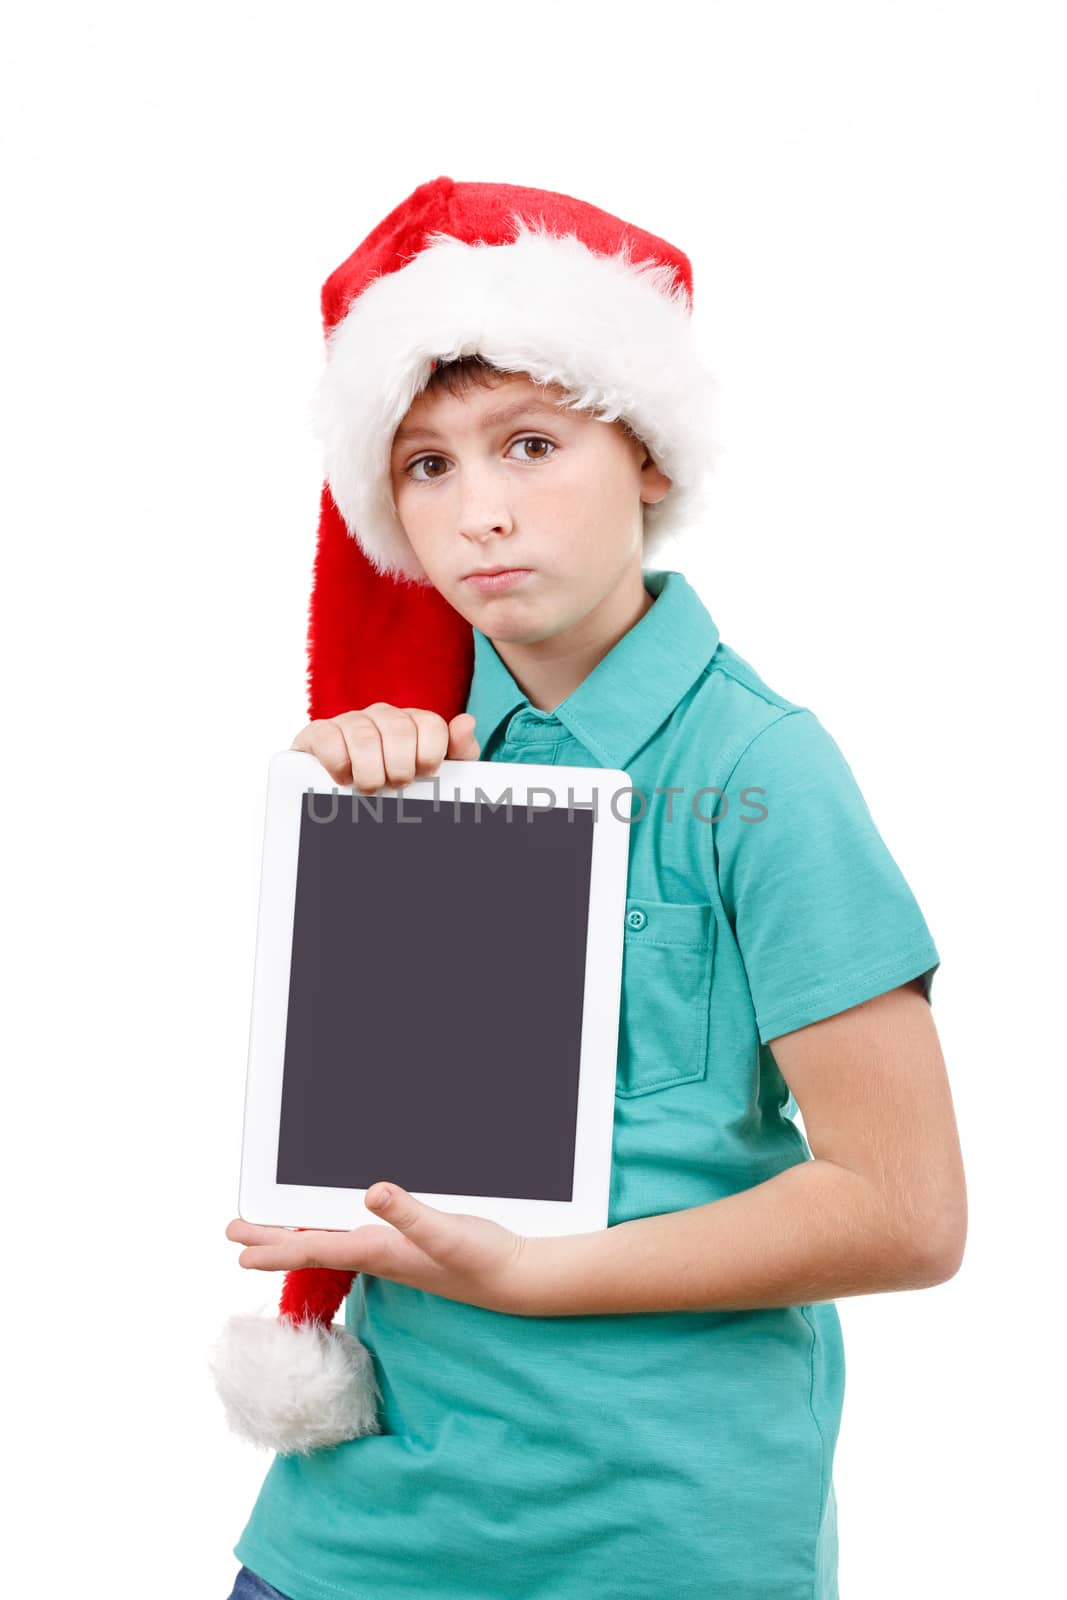 teenage boy with santa claus hat isolated on white and showing his new digital tablet 